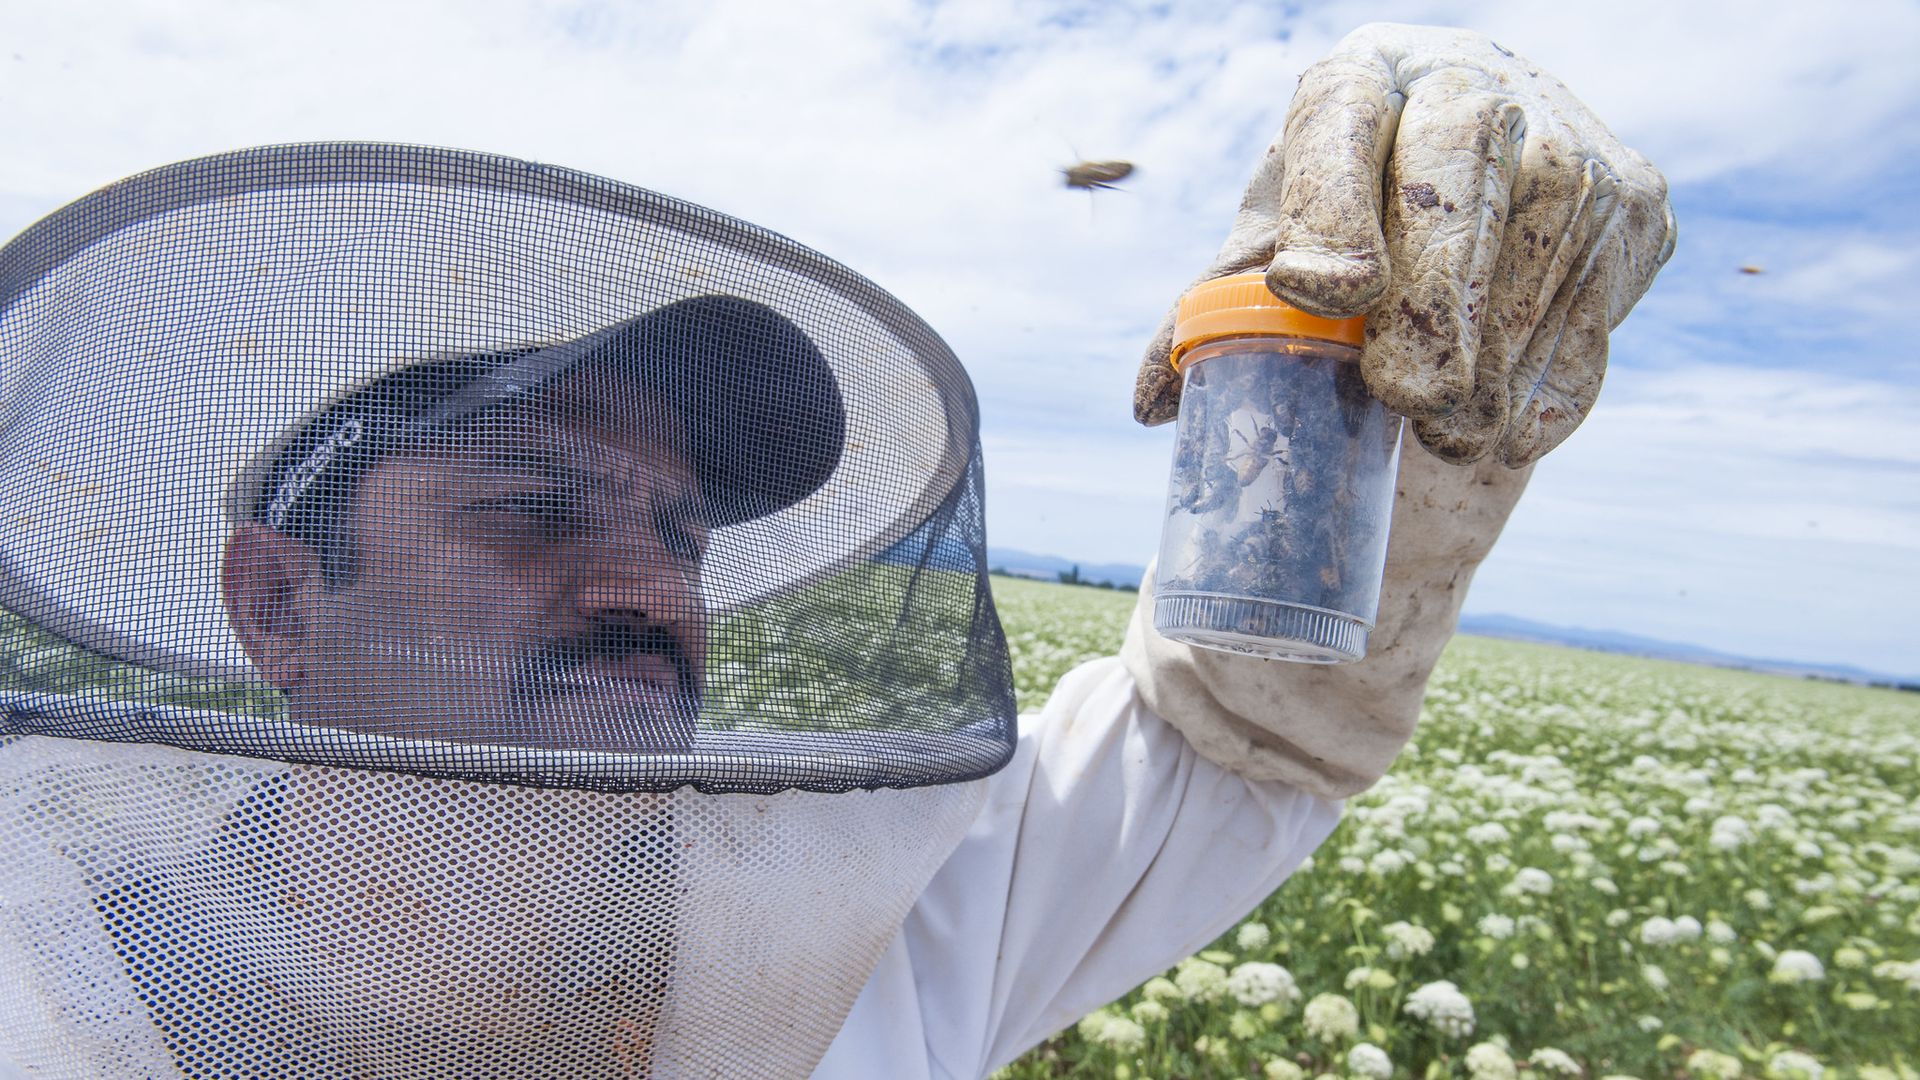 A photo of a person holding up a clear canister filled with bees.